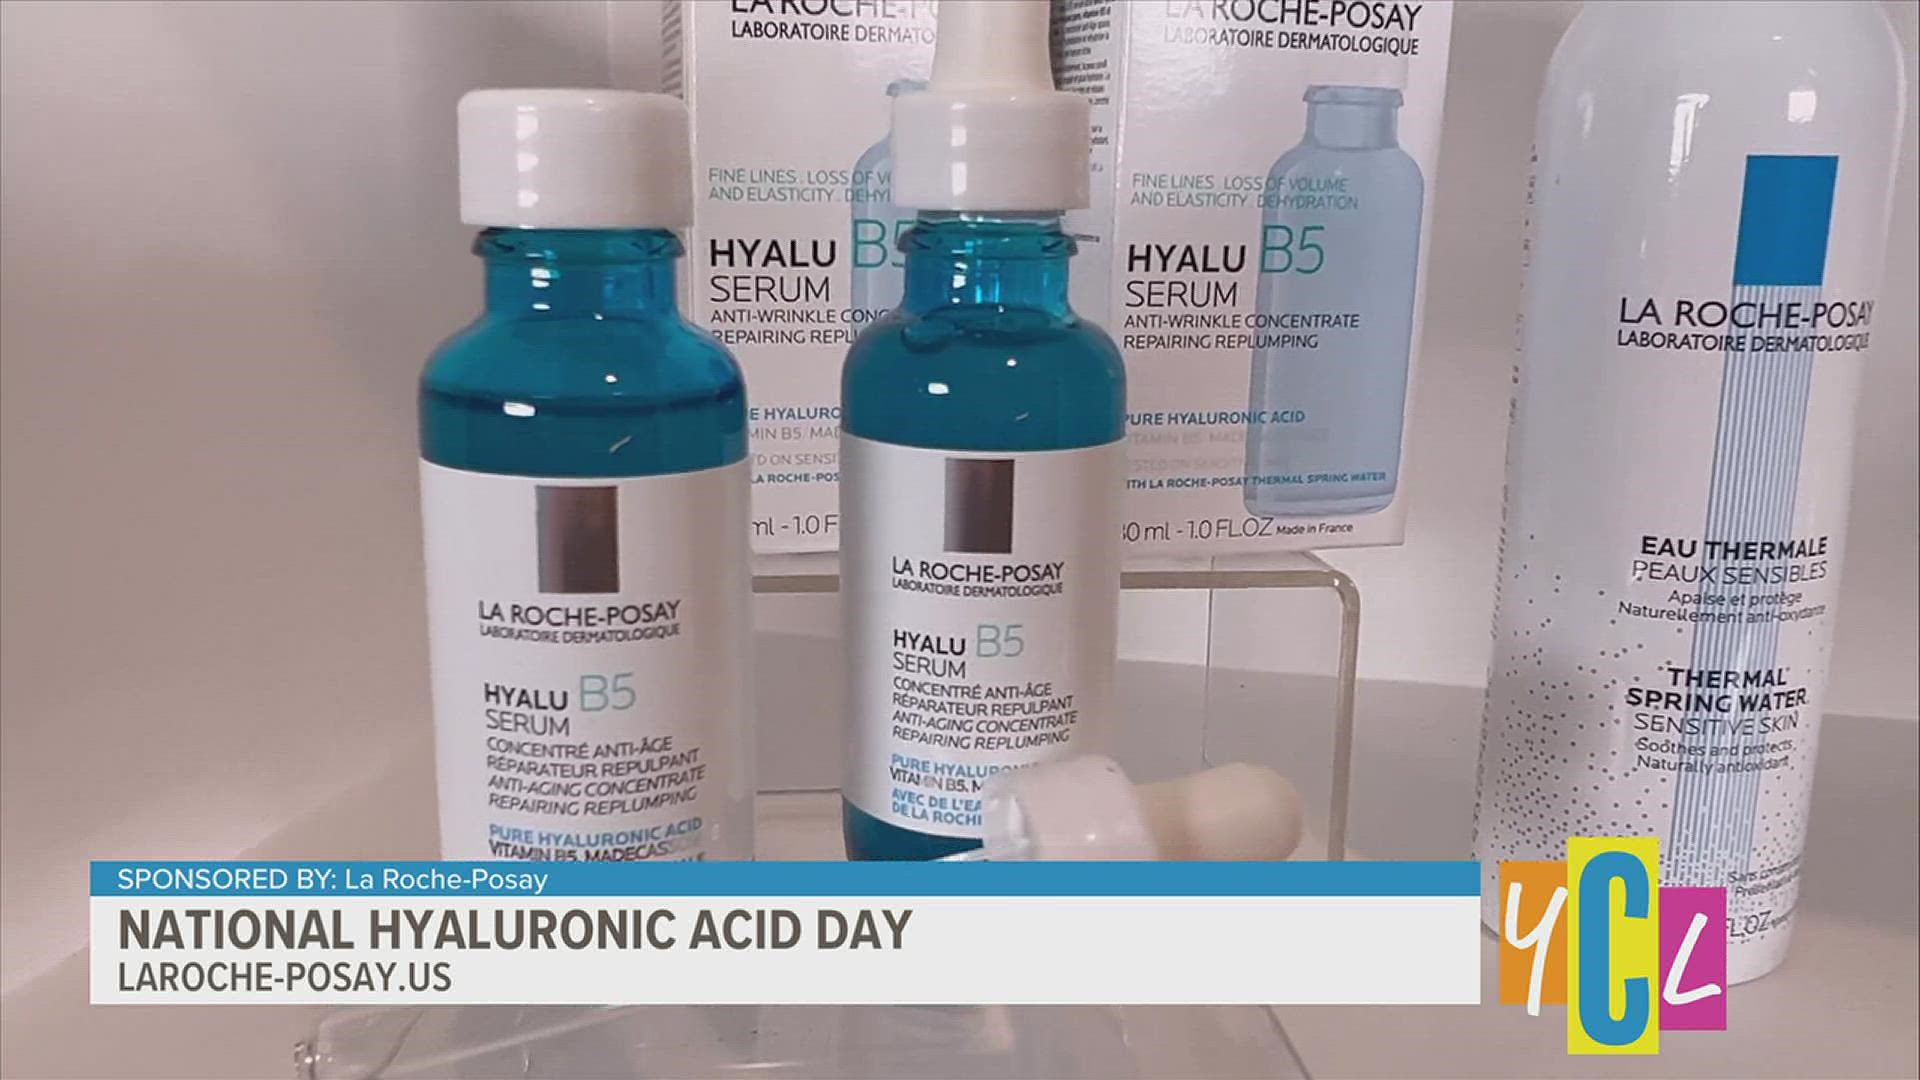 Check out Joann Butler's newest secret to great looking skin! This segment is paid by La Roche-Posay.